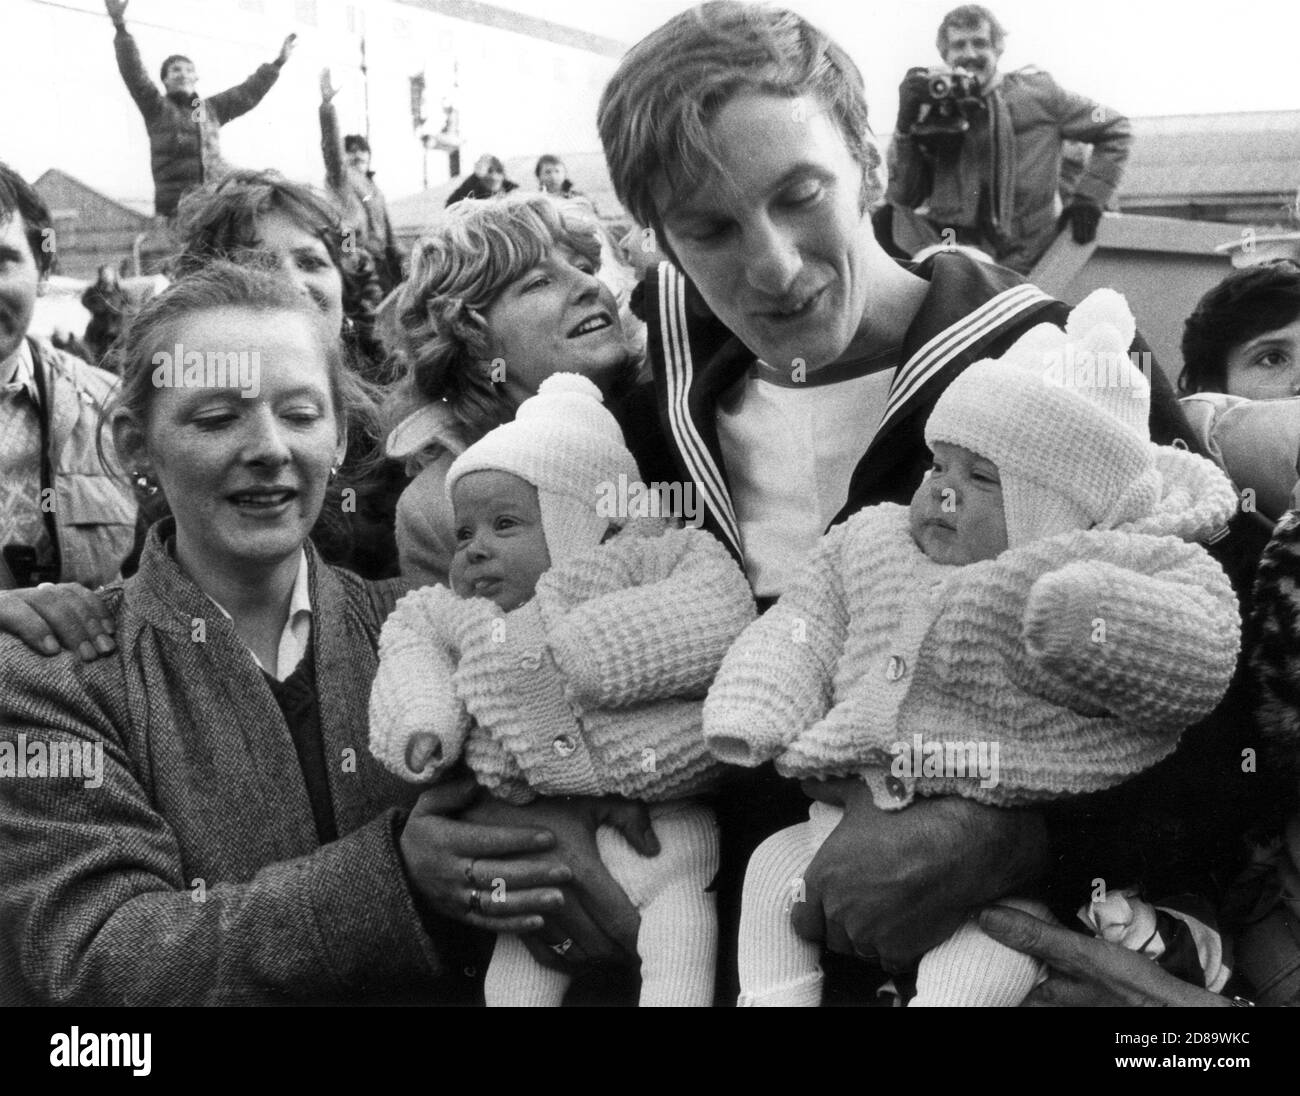 SEEING HIS TWIN DAUGHTERS FOR THE FIRST TIME IS NEWLY PROMOTED PETTY OFFICER ALAN DENHAM. HE WAS GREETED BY THE TWINS CLAIRE AND DONNA AND HIS WIFE CHERYL (22) WHEN HMS ILLUSTRIOUS ARRIVED BACK IN PORTSMOUTH FROM THE FALKLANDS. 1982 Stock Photo